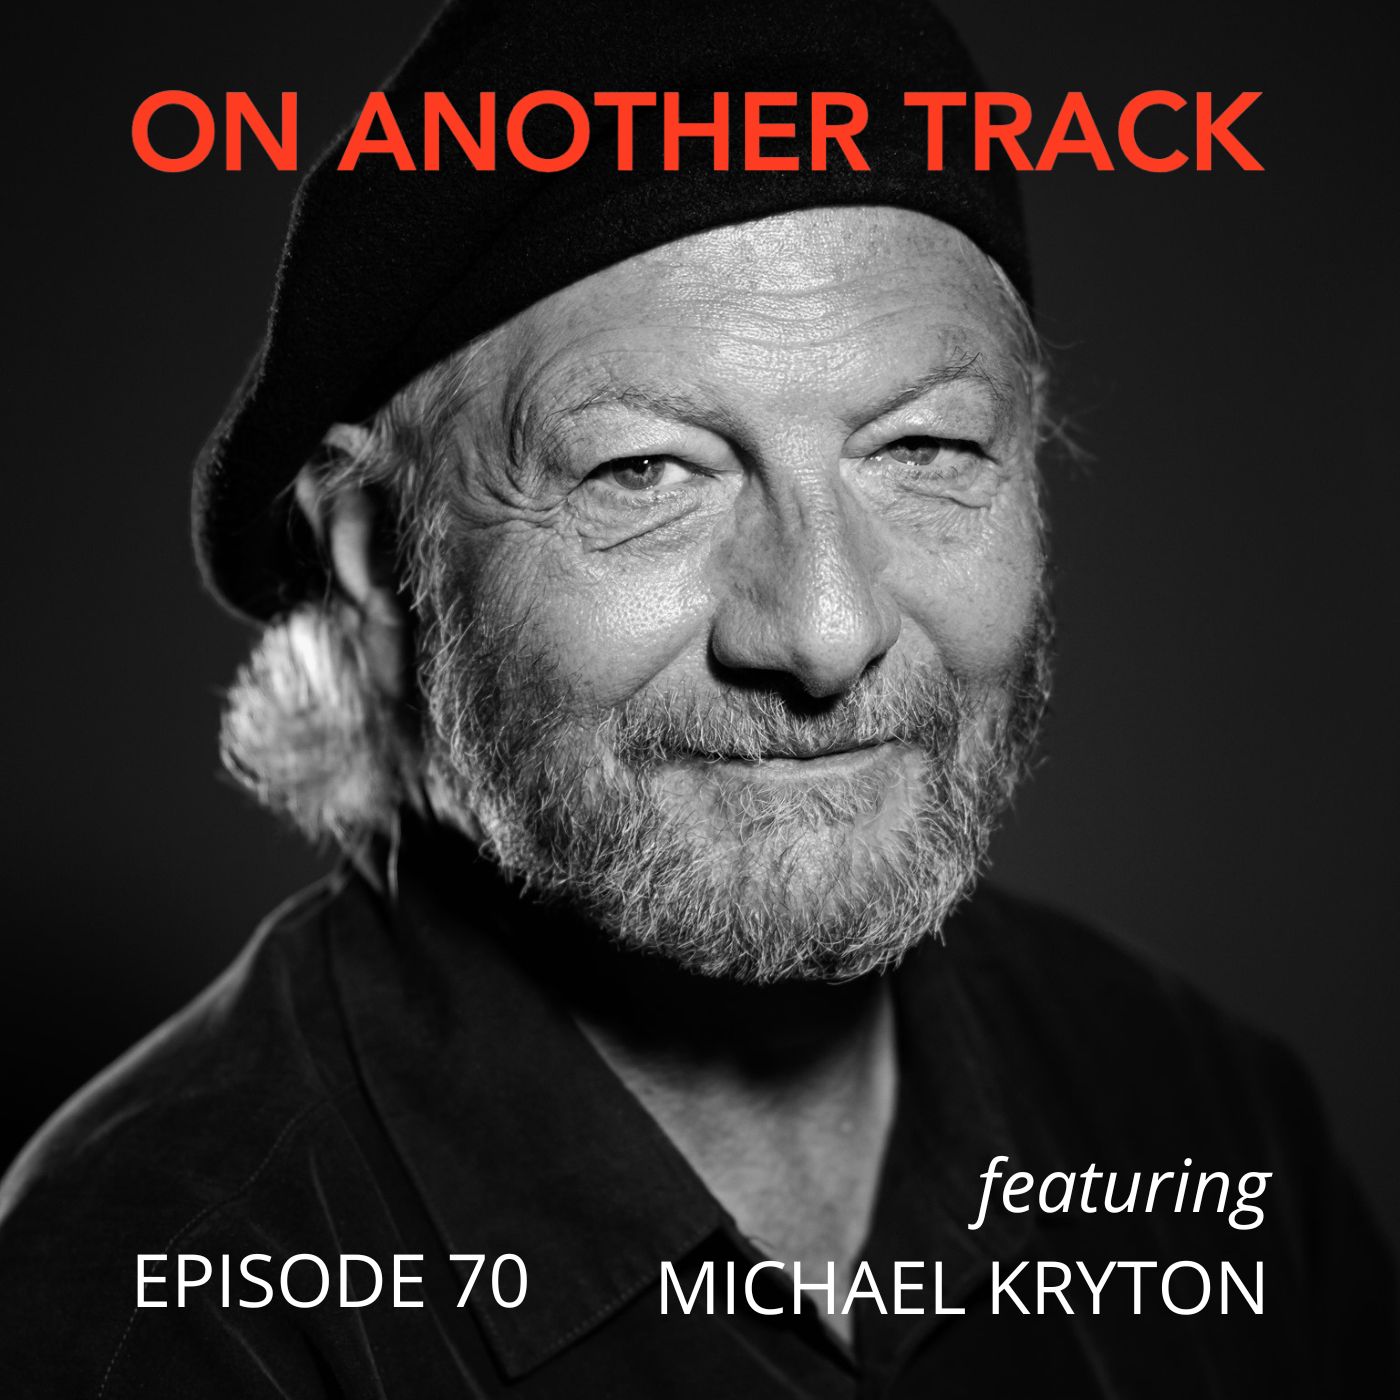 Michael  Kryton - How did he help to make country music cool? Image